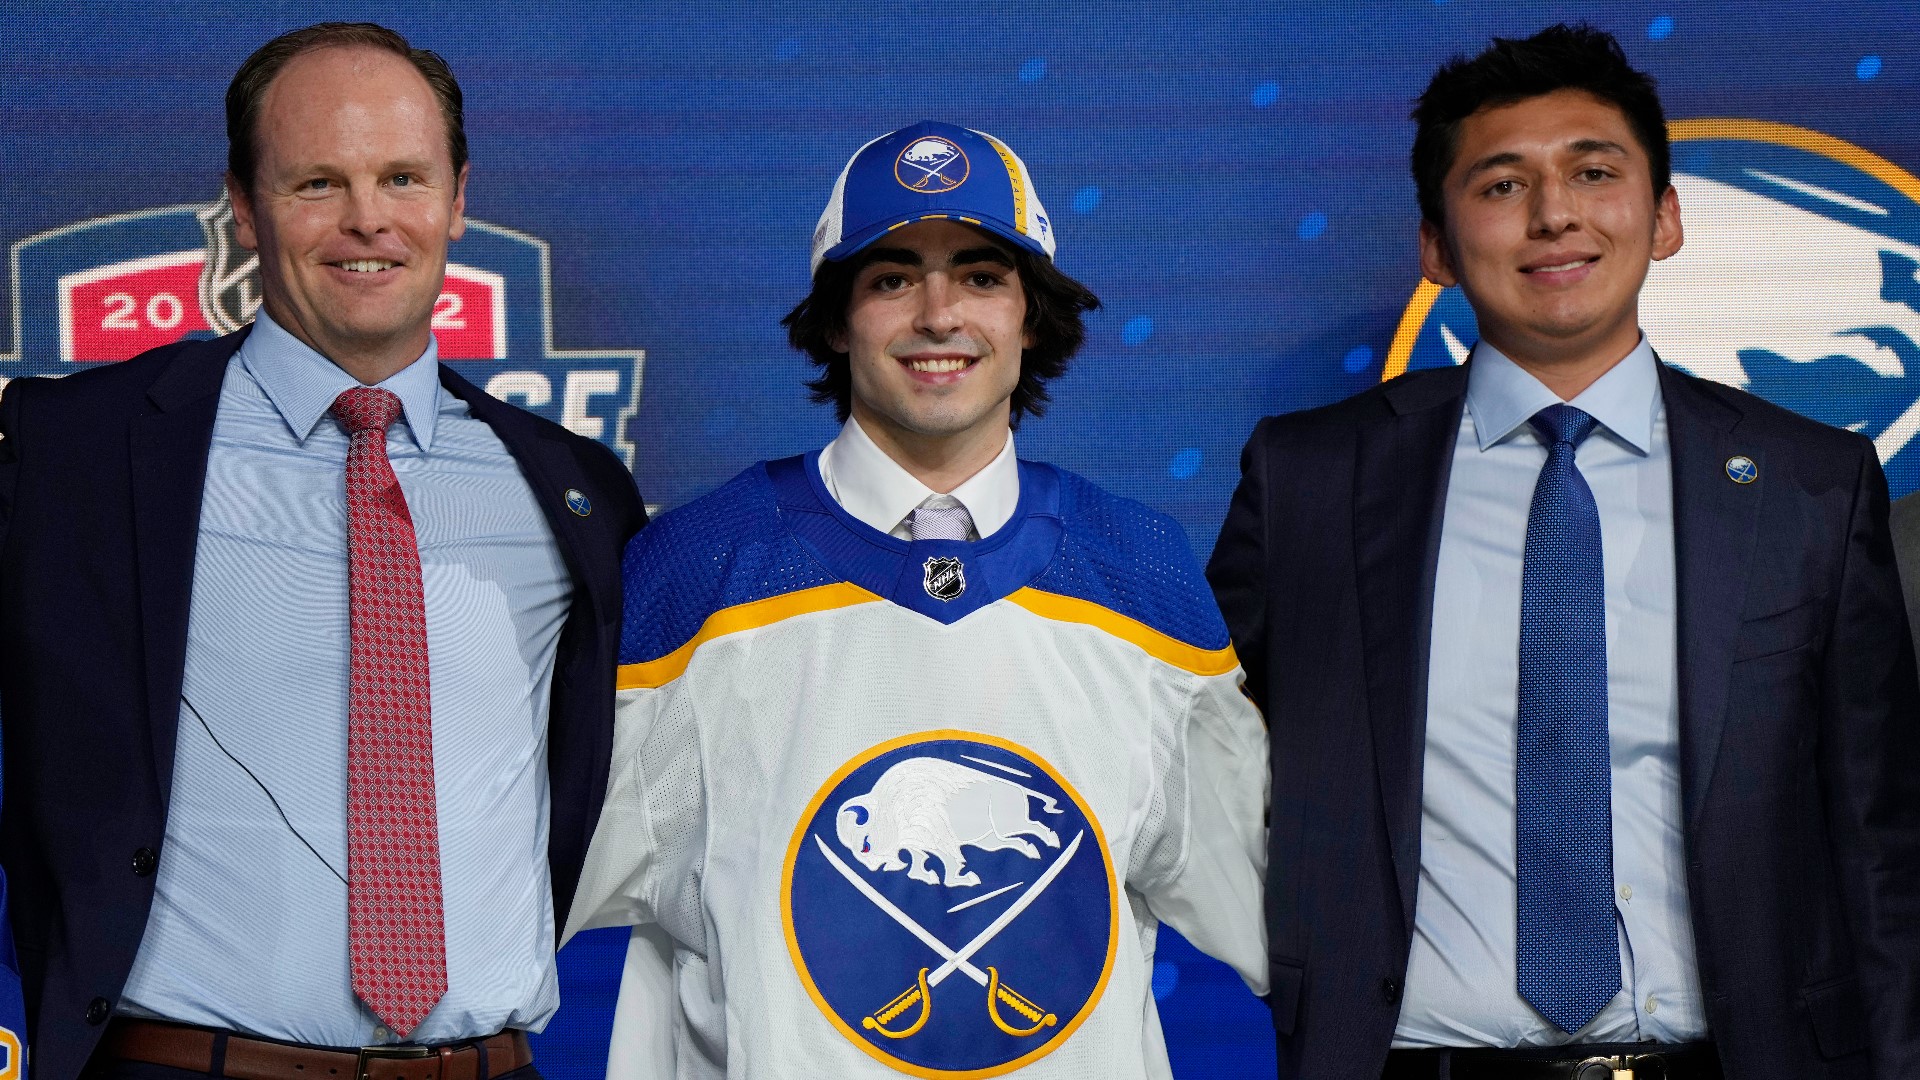 Buffalo Sabres general manager Kevyn Adams spoke with the media after the two-day NHL draft ended Friday in Montreal.